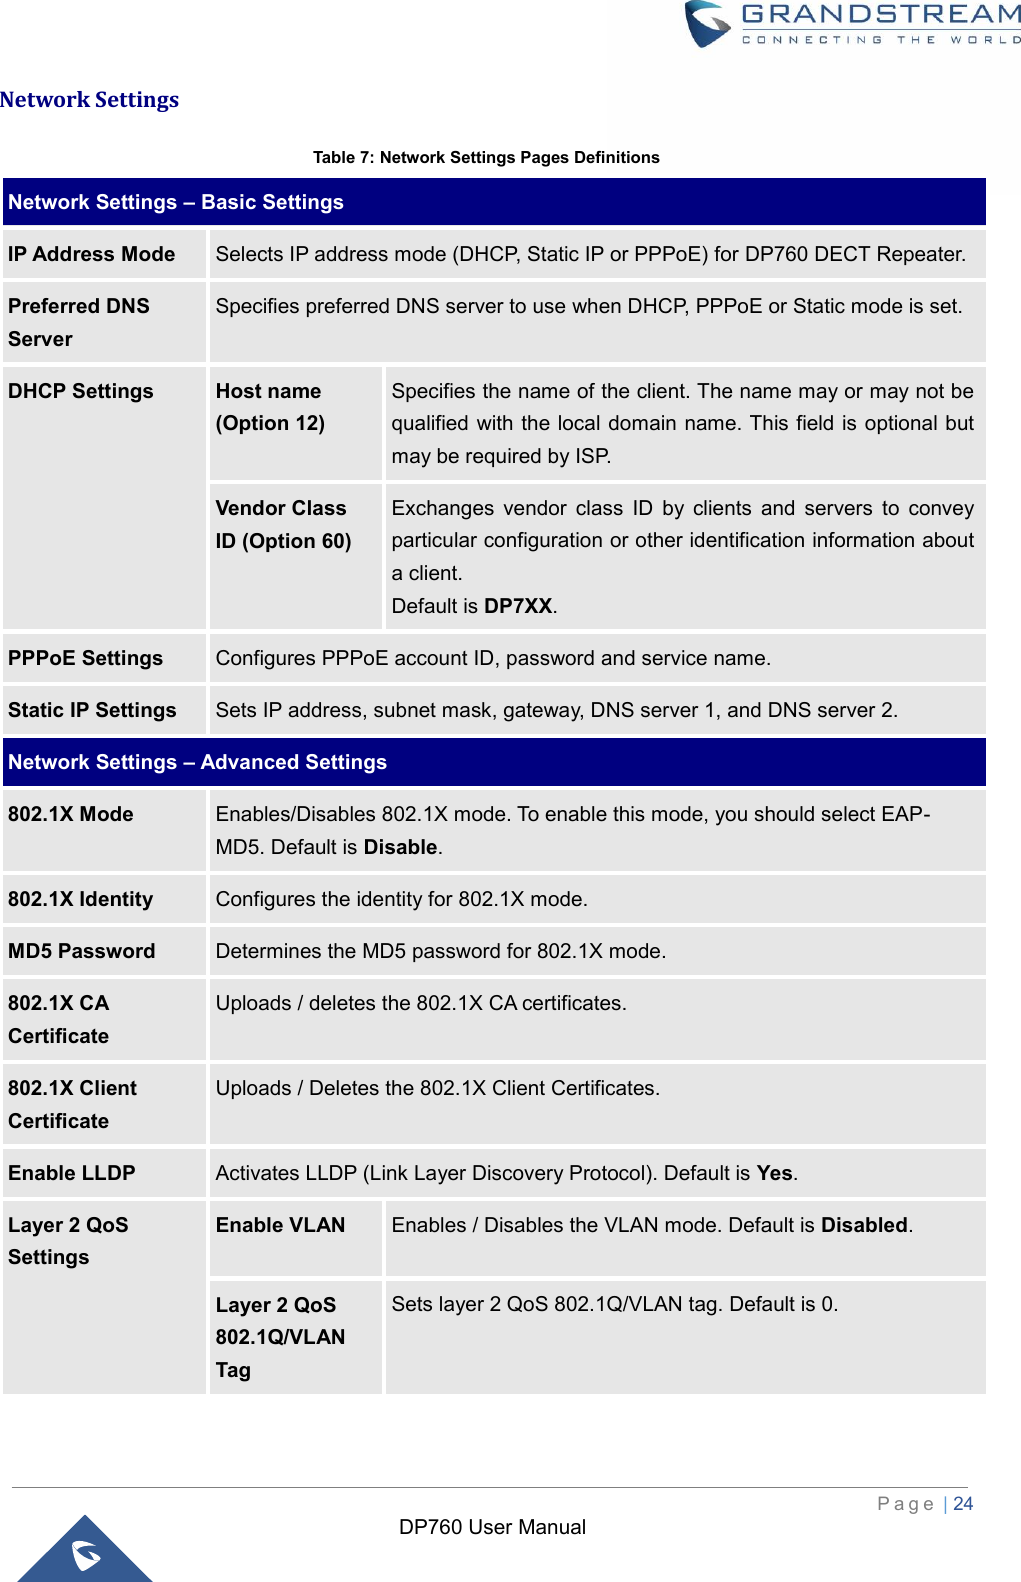  P a g e  | 24   DP760 User Manual Network Settings Table 7: Network Settings Pages Definitions Network Settings – Basic Settings IP Address Mode Selects IP address mode (DHCP, Static IP or PPPoE) for DP760 DECT Repeater. Preferred DNS Server Specifies preferred DNS server to use when DHCP, PPPoE or Static mode is set. DHCP Settings Host name (Option 12) Specifies the name of the client. The name may or may not be qualified with the local domain name. This field is optional but may be required by ISP. Vendor Class ID (Option 60) Exchanges  vendor  class  ID  by  clients  and  servers  to  convey particular configuration or other identification information about a client.   Default is DP7XX.   PPPoE Settings Configures PPPoE account ID, password and service name. Static IP Settings Sets IP address, subnet mask, gateway, DNS server 1, and DNS server 2. Network Settings – Advanced Settings 802.1X Mode Enables/Disables 802.1X mode. To enable this mode, you should select EAP-MD5. Default is Disable. 802.1X Identity Configures the identity for 802.1X mode. MD5 Password Determines the MD5 password for 802.1X mode. 802.1X CA Certificate Uploads / deletes the 802.1X CA certificates. 802.1X Client Certificate Uploads / Deletes the 802.1X Client Certificates. Enable LLDP Activates LLDP (Link Layer Discovery Protocol). Default is Yes. Layer 2 QoS Settings Enable VLAN Enables / Disables the VLAN mode. Default is Disabled. Layer 2 QoS 802.1Q/VLAN Tag Sets layer 2 QoS 802.1Q/VLAN tag. Default is 0. 